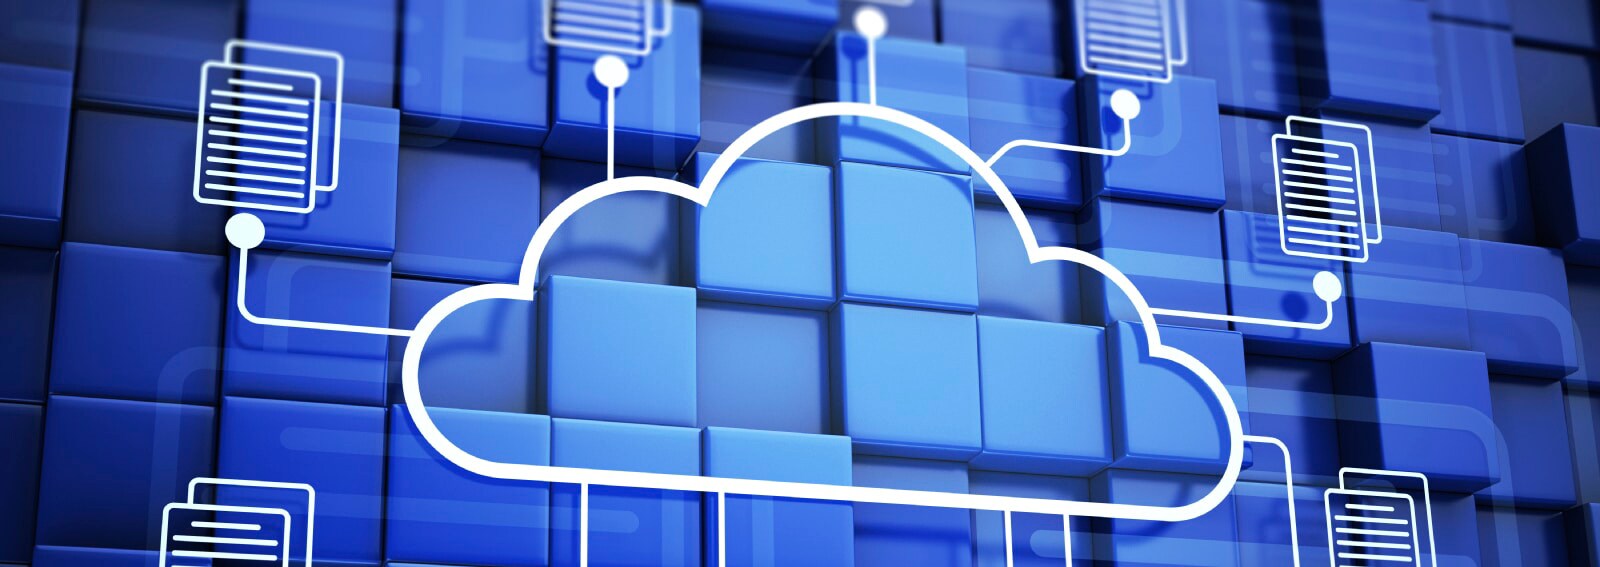 Abstract image of data centre and cloud